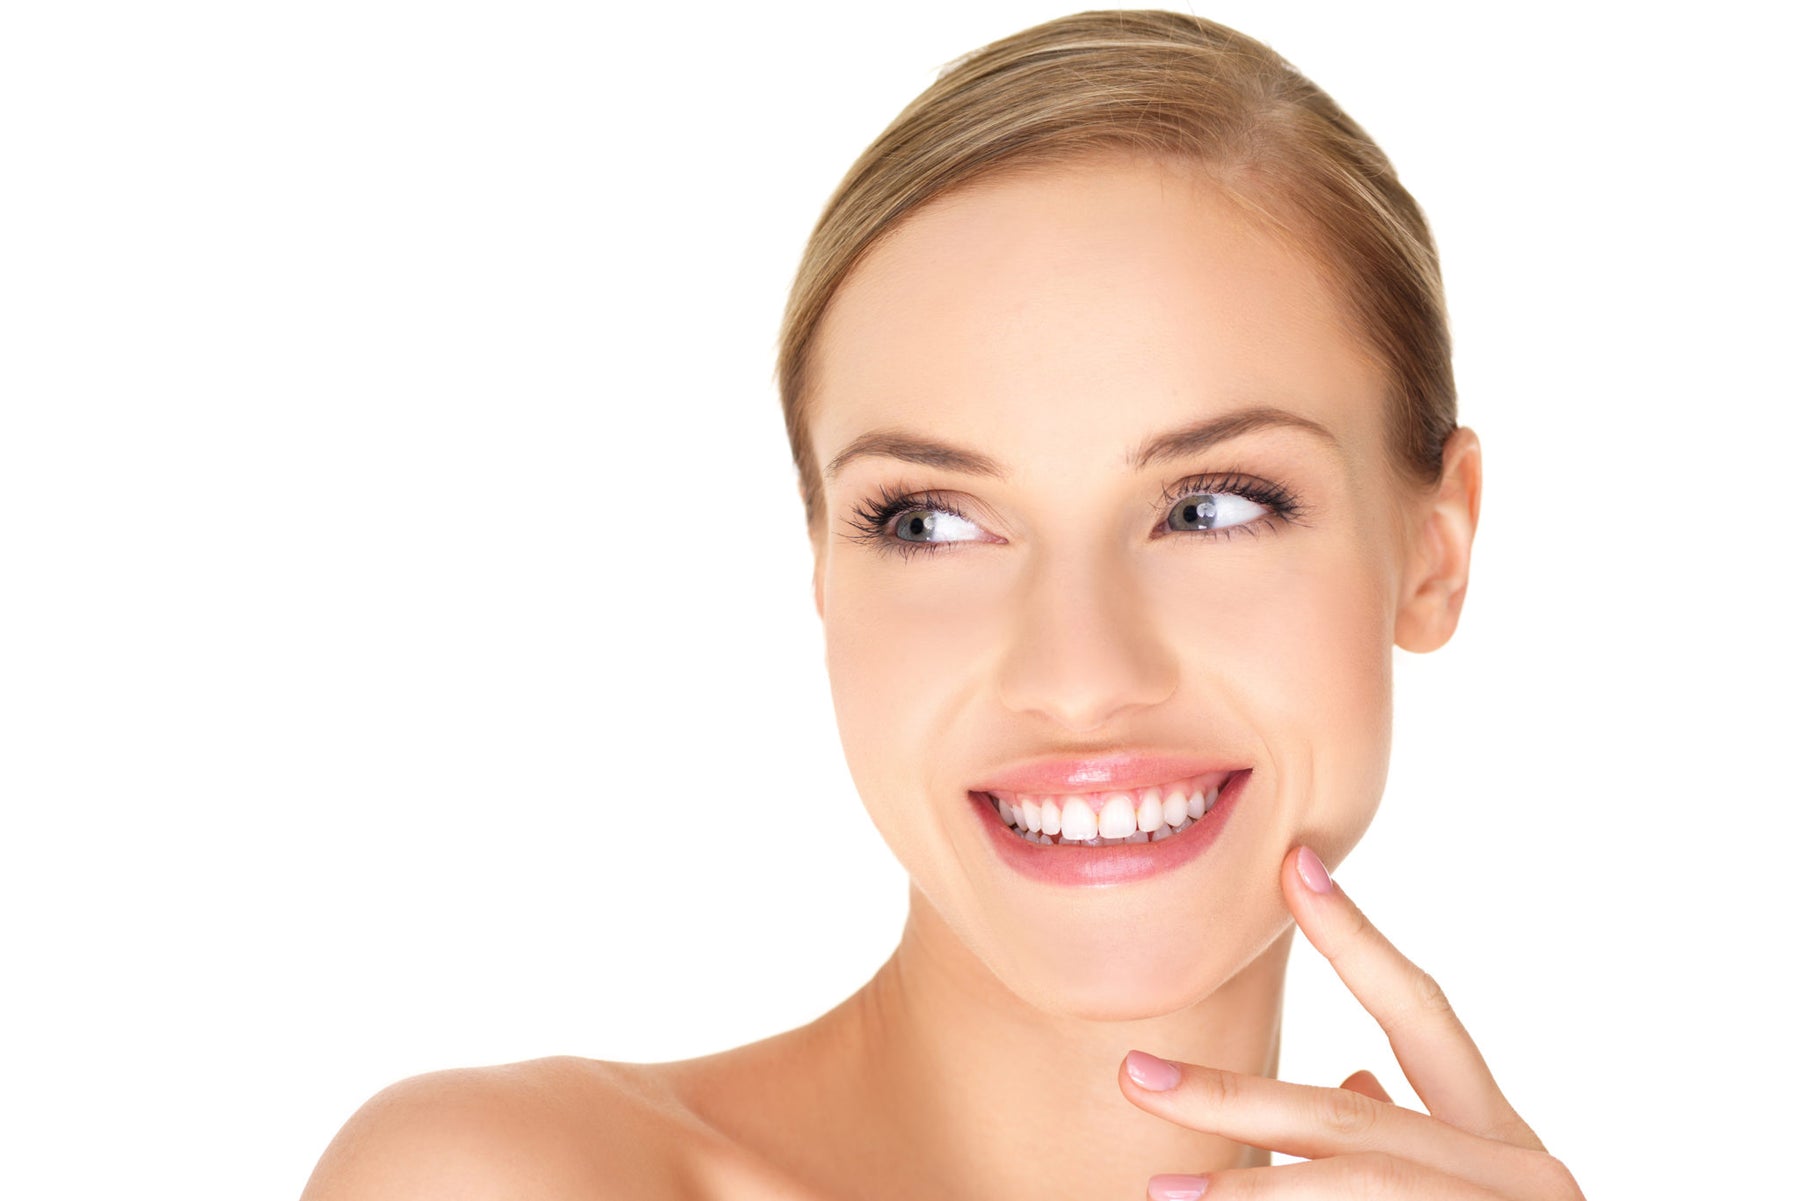 6 ways to whiten your teeth naturally at home